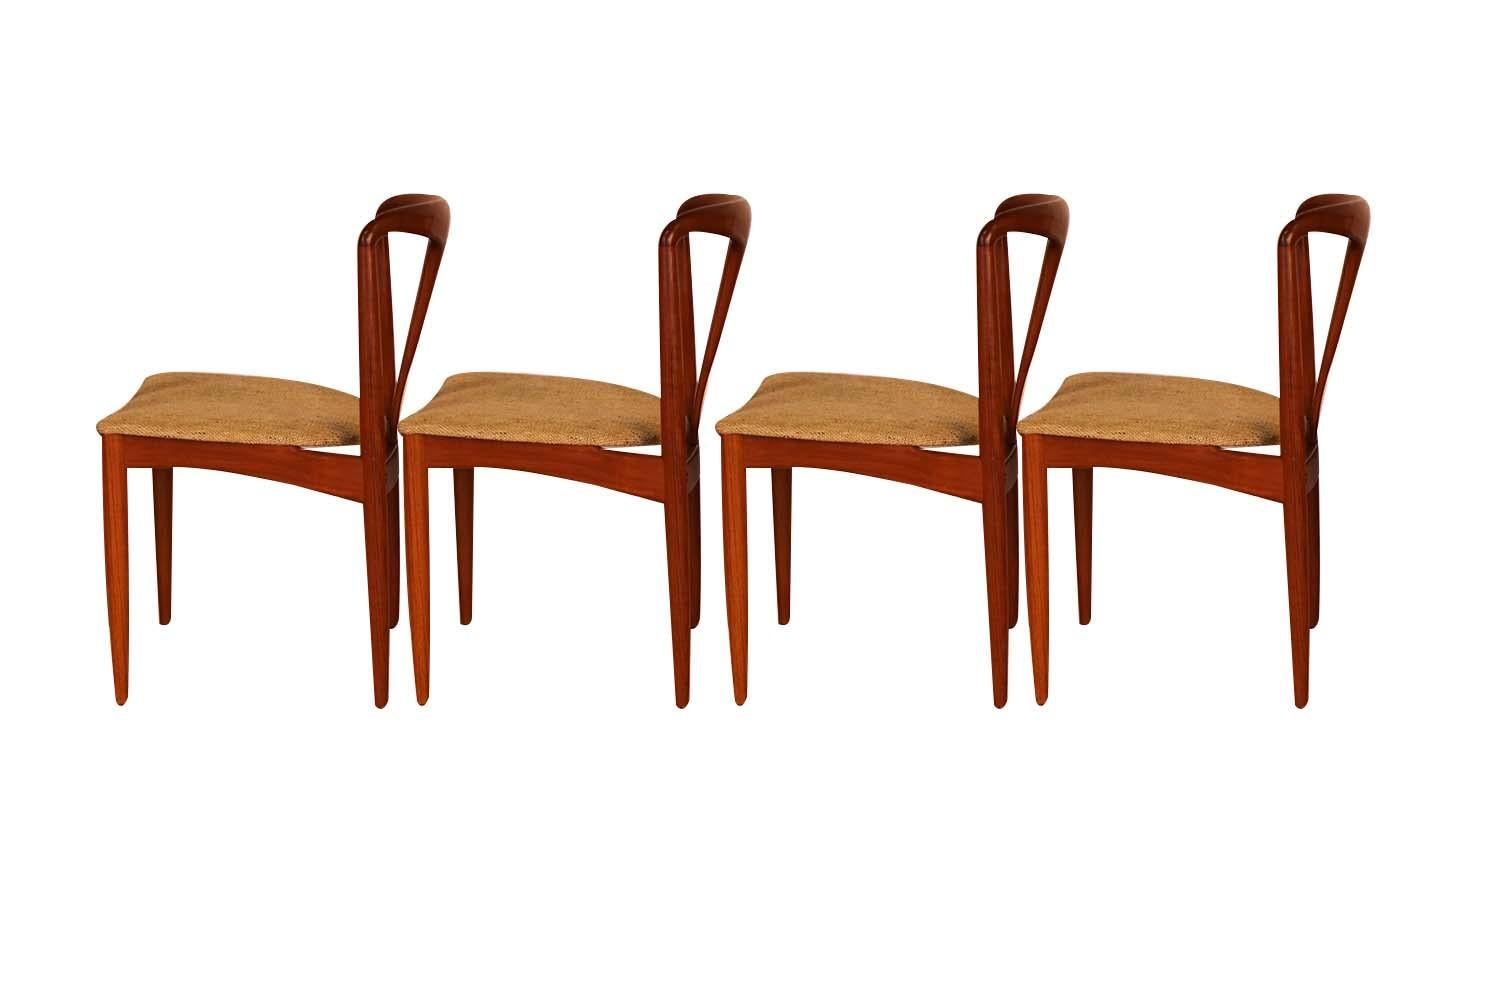 Set of 4 teak Danish modern 'Juliane' dining chairs by famous designer Johannes Andersen for Uldum Møbelfabrik, made in Denmark, circa 1960s. Superbly crafted in rich solid teak frames, remarkably notable are the carved sculpted backrests with